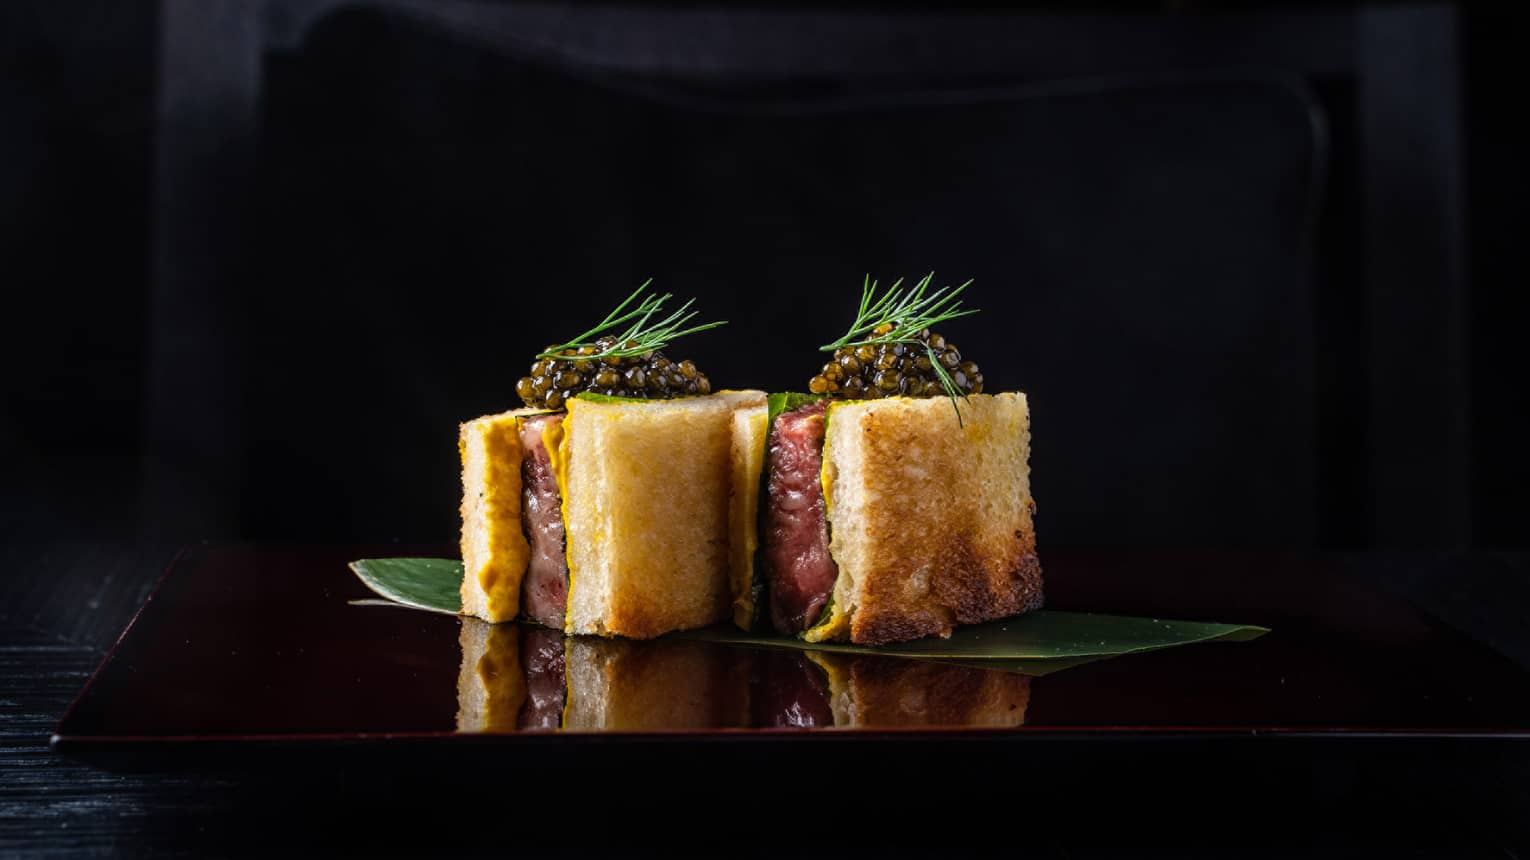 Sando Wagyu Beef topped with Caviar on banana leaf, dill frond garnish, black background